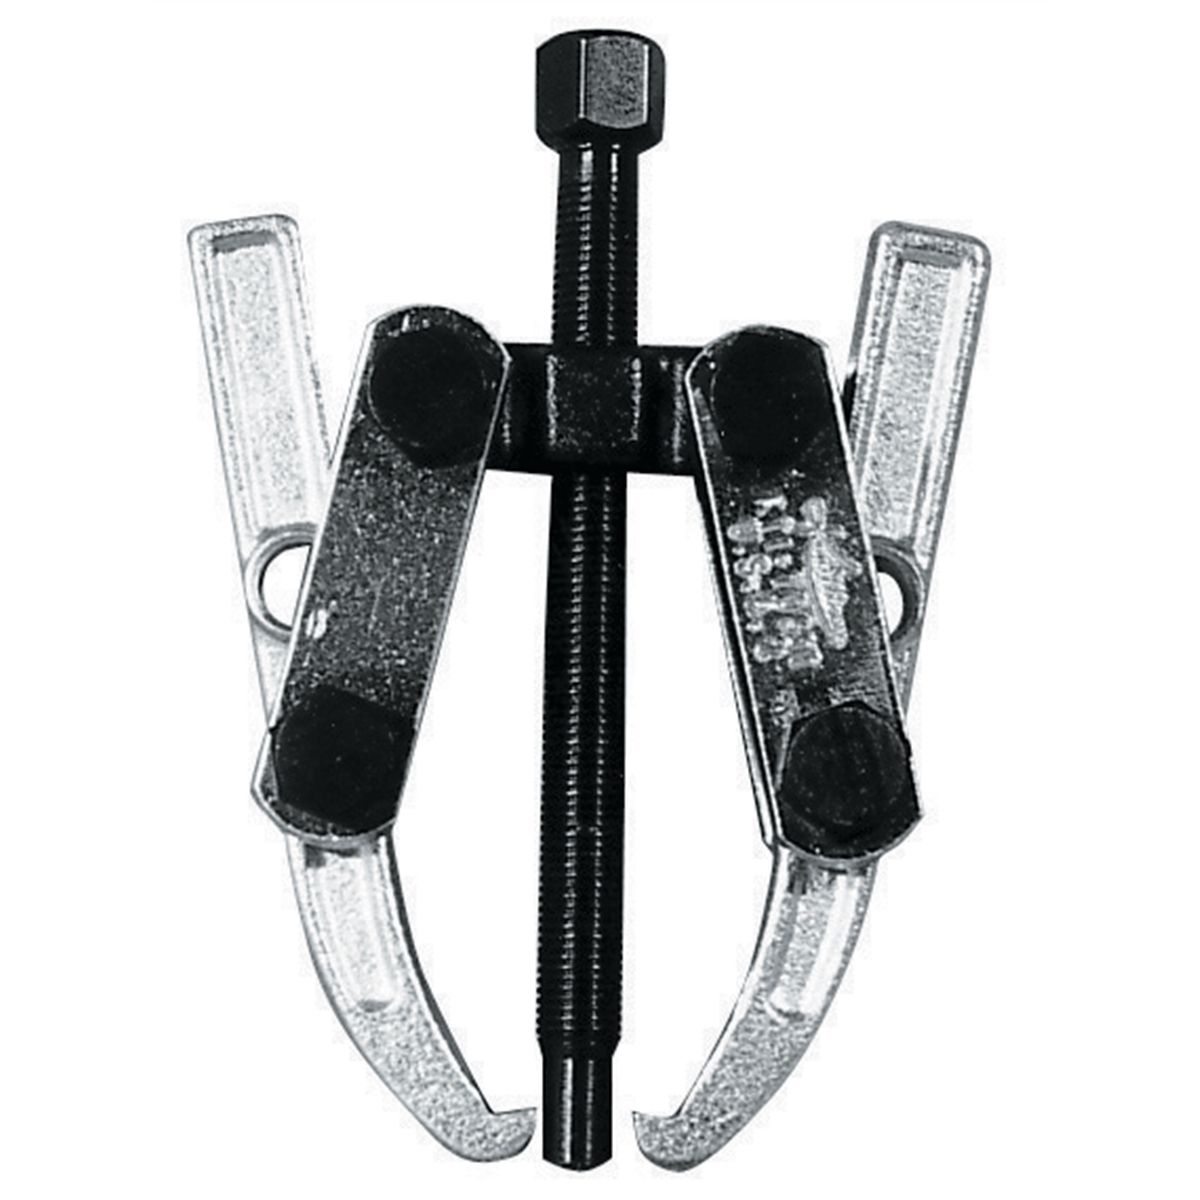 Two Jaw Adjustable Puller - 4 In - 2 Ton